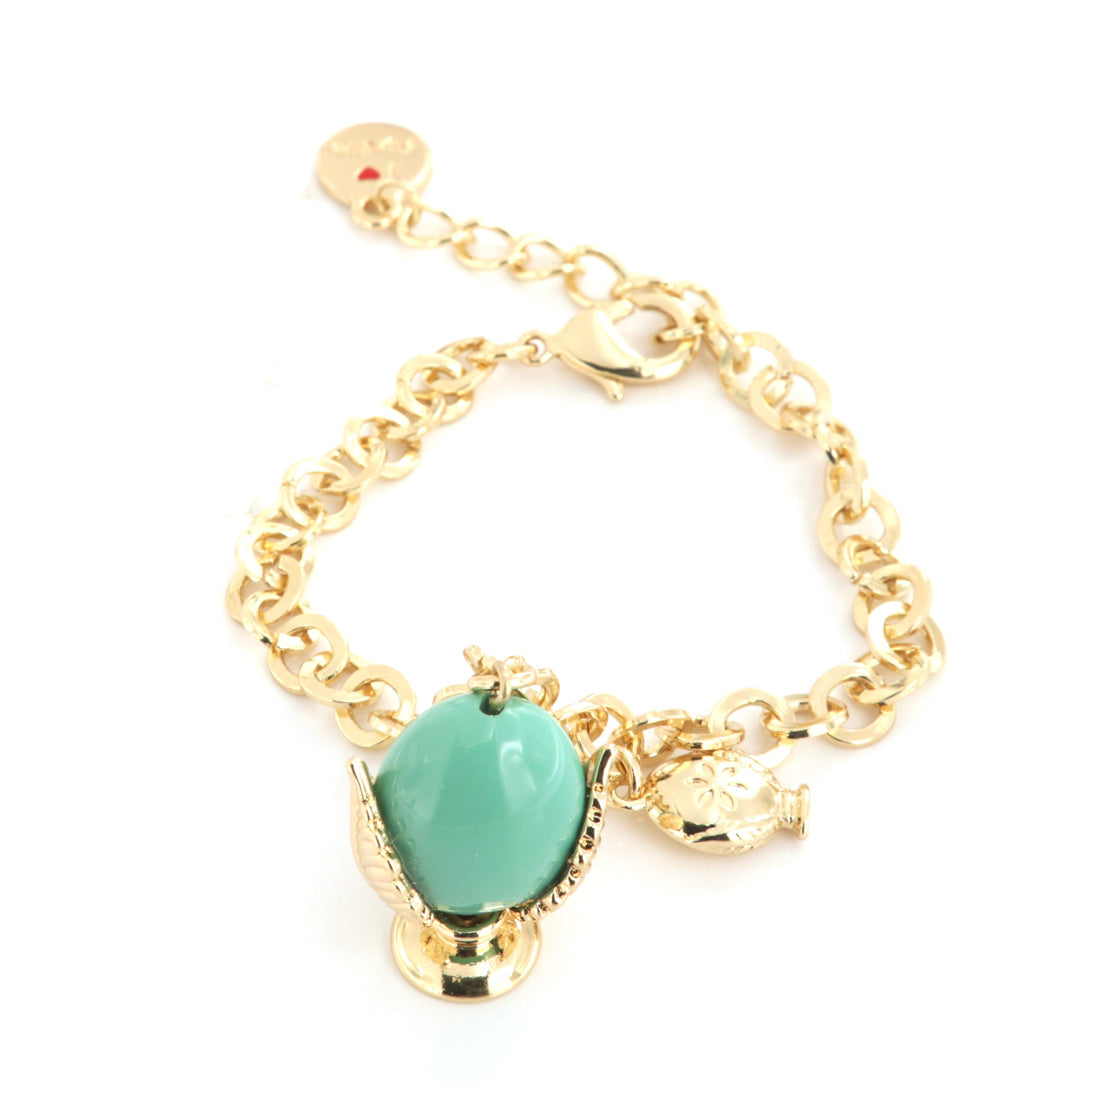 Metal bracelet with pendant Apulian pumo, embellished with green enamel and lateral mini pumo